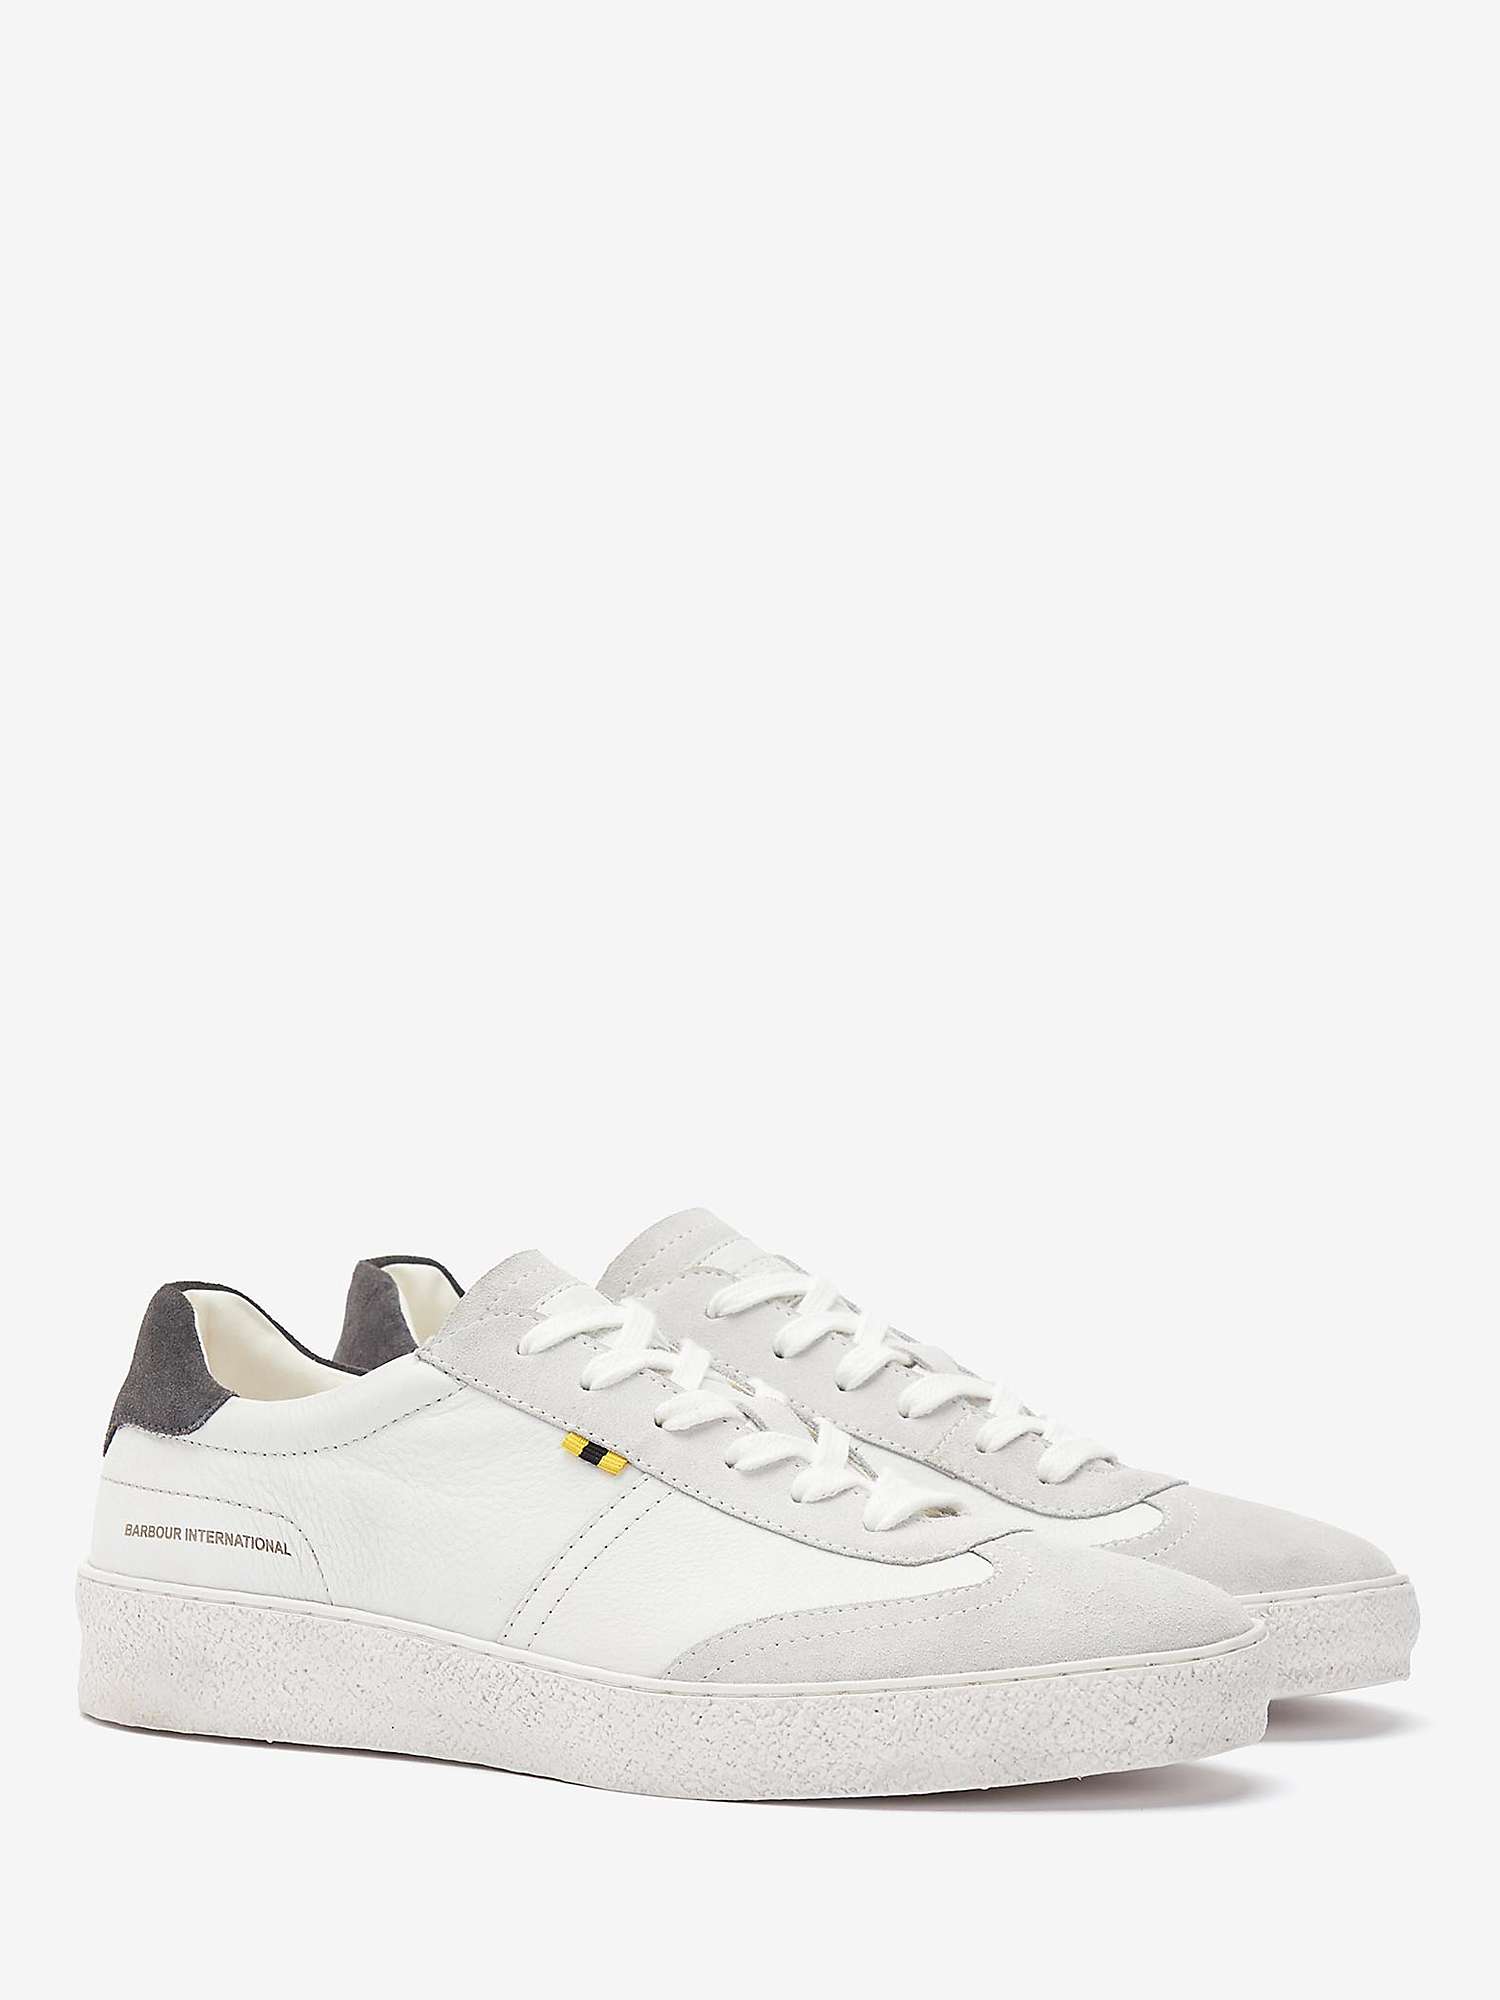 Buy Barbour International Felix Trainers, White Online at johnlewis.com